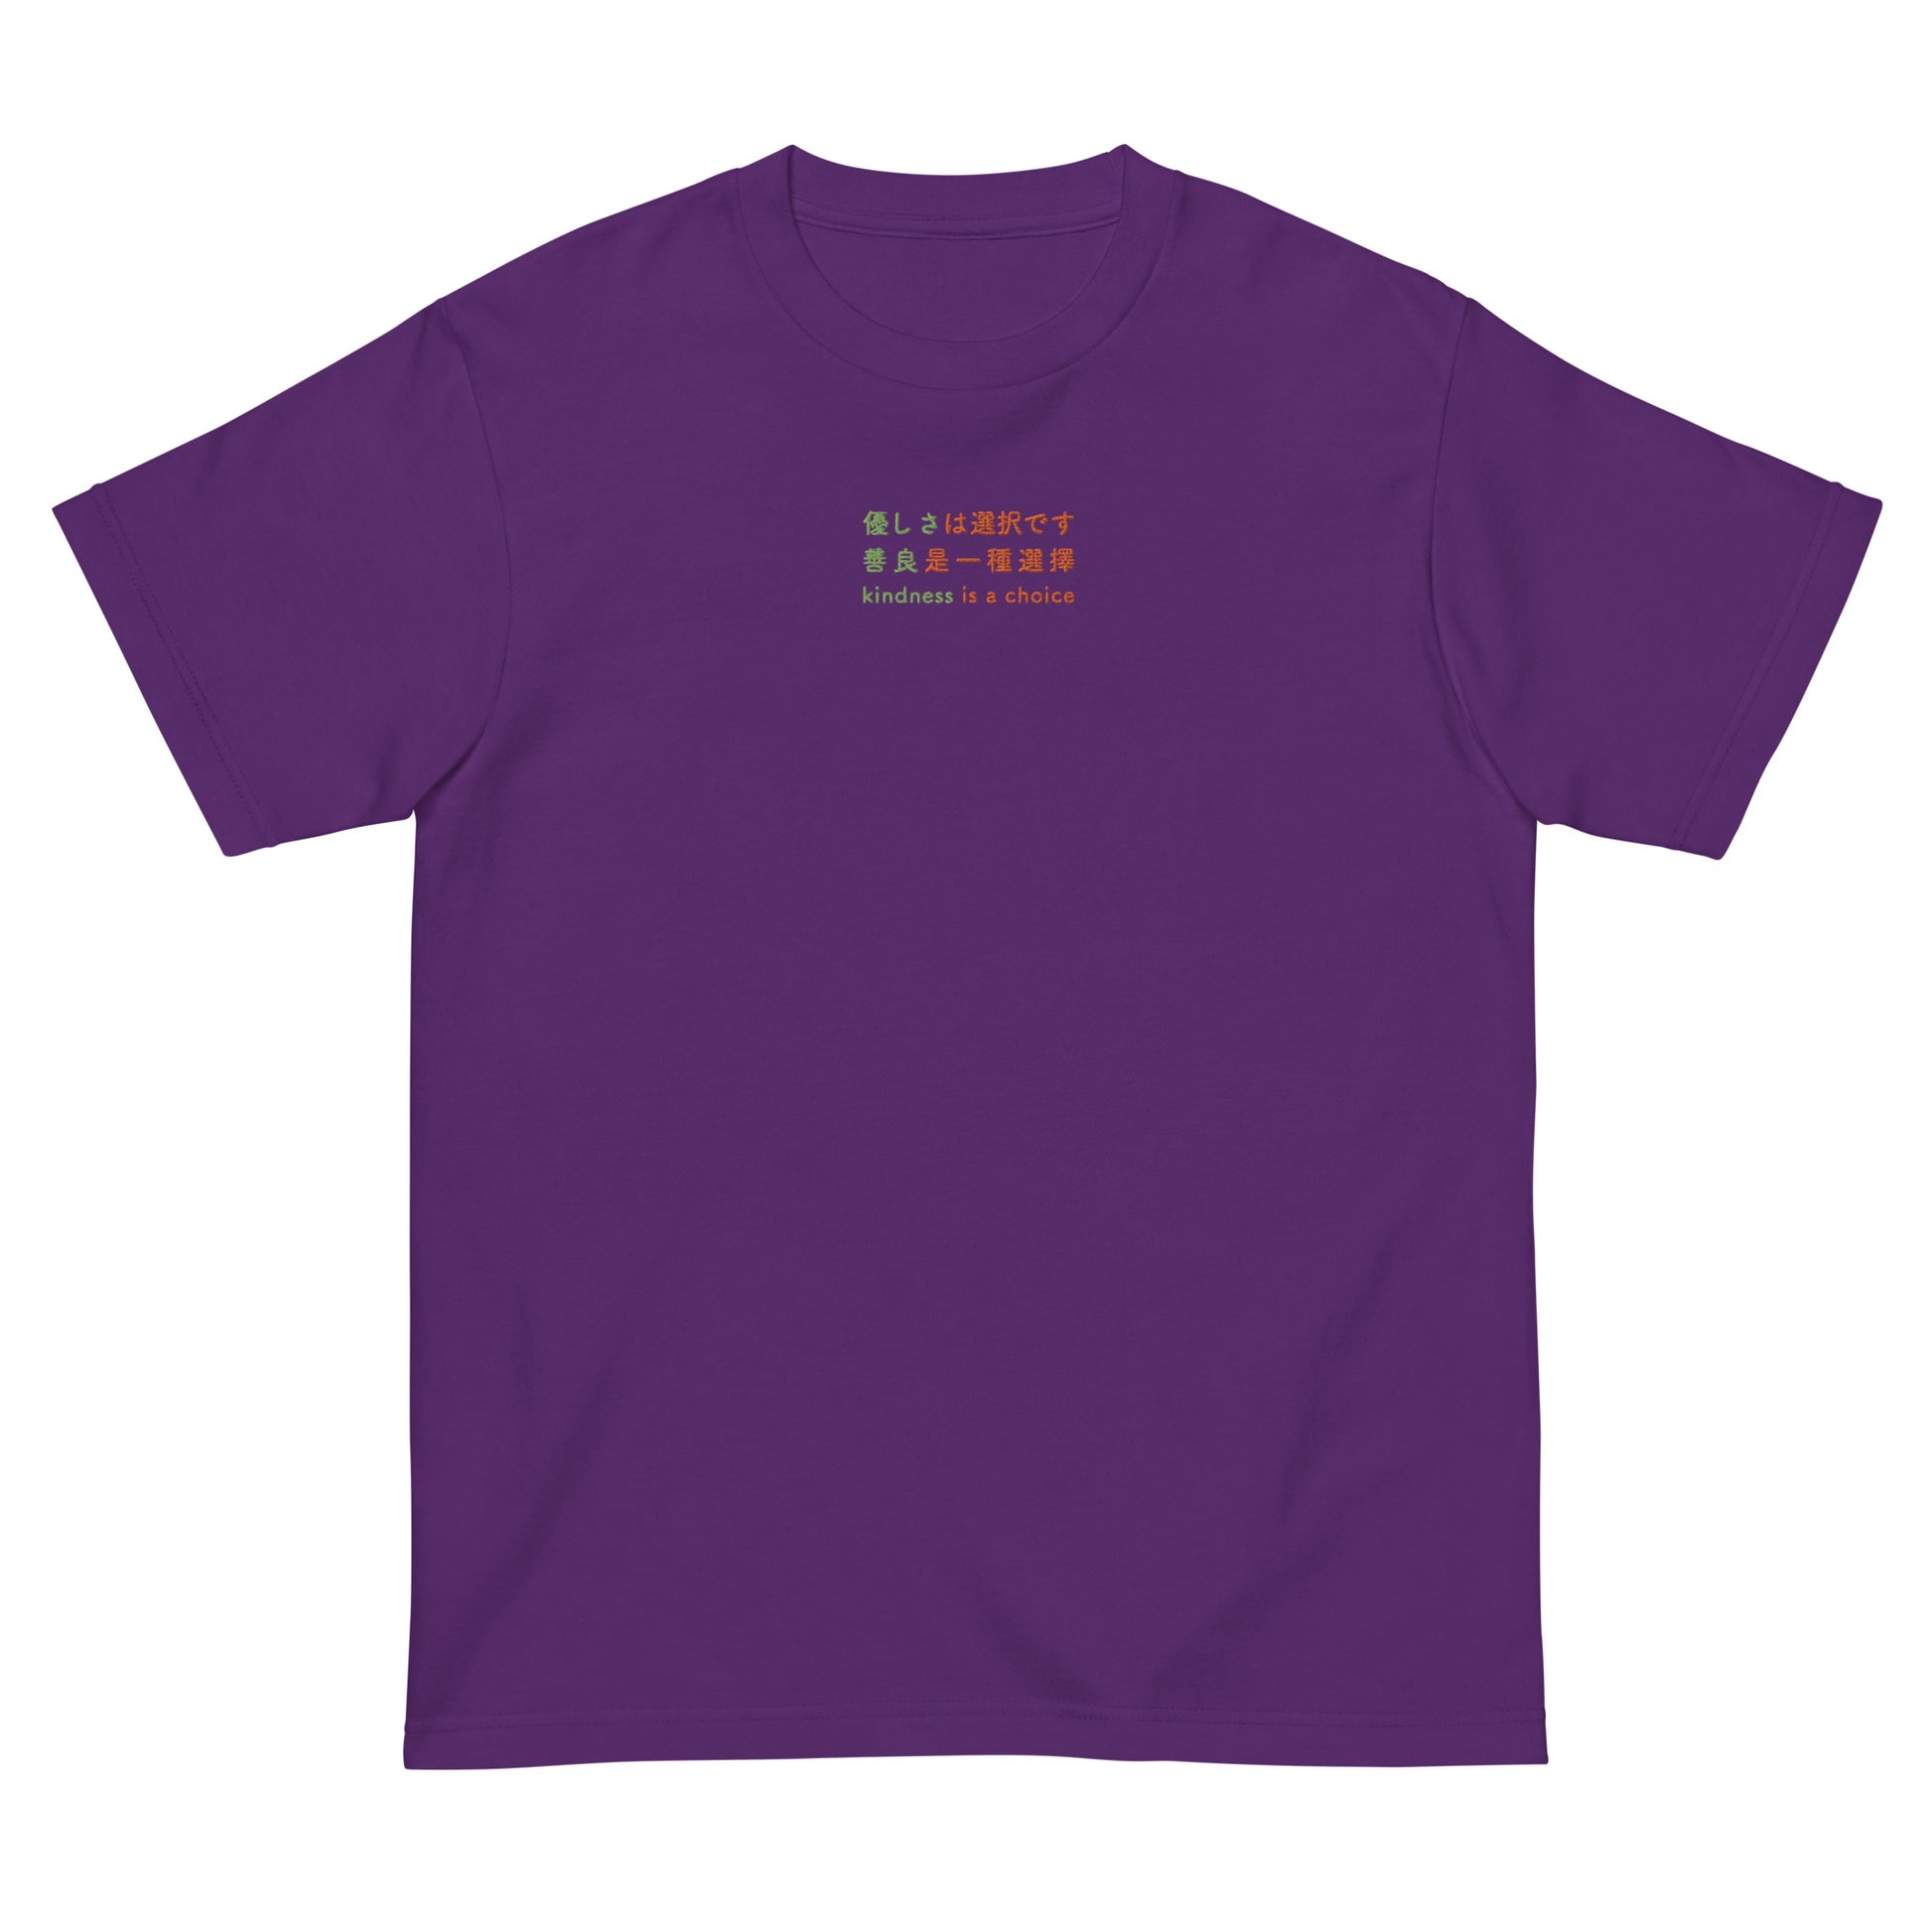 Purple High Quality Tee - Front Design with an Green, Orange Embroidery "Kindness is a Choice" in Japanese,Chinese and English